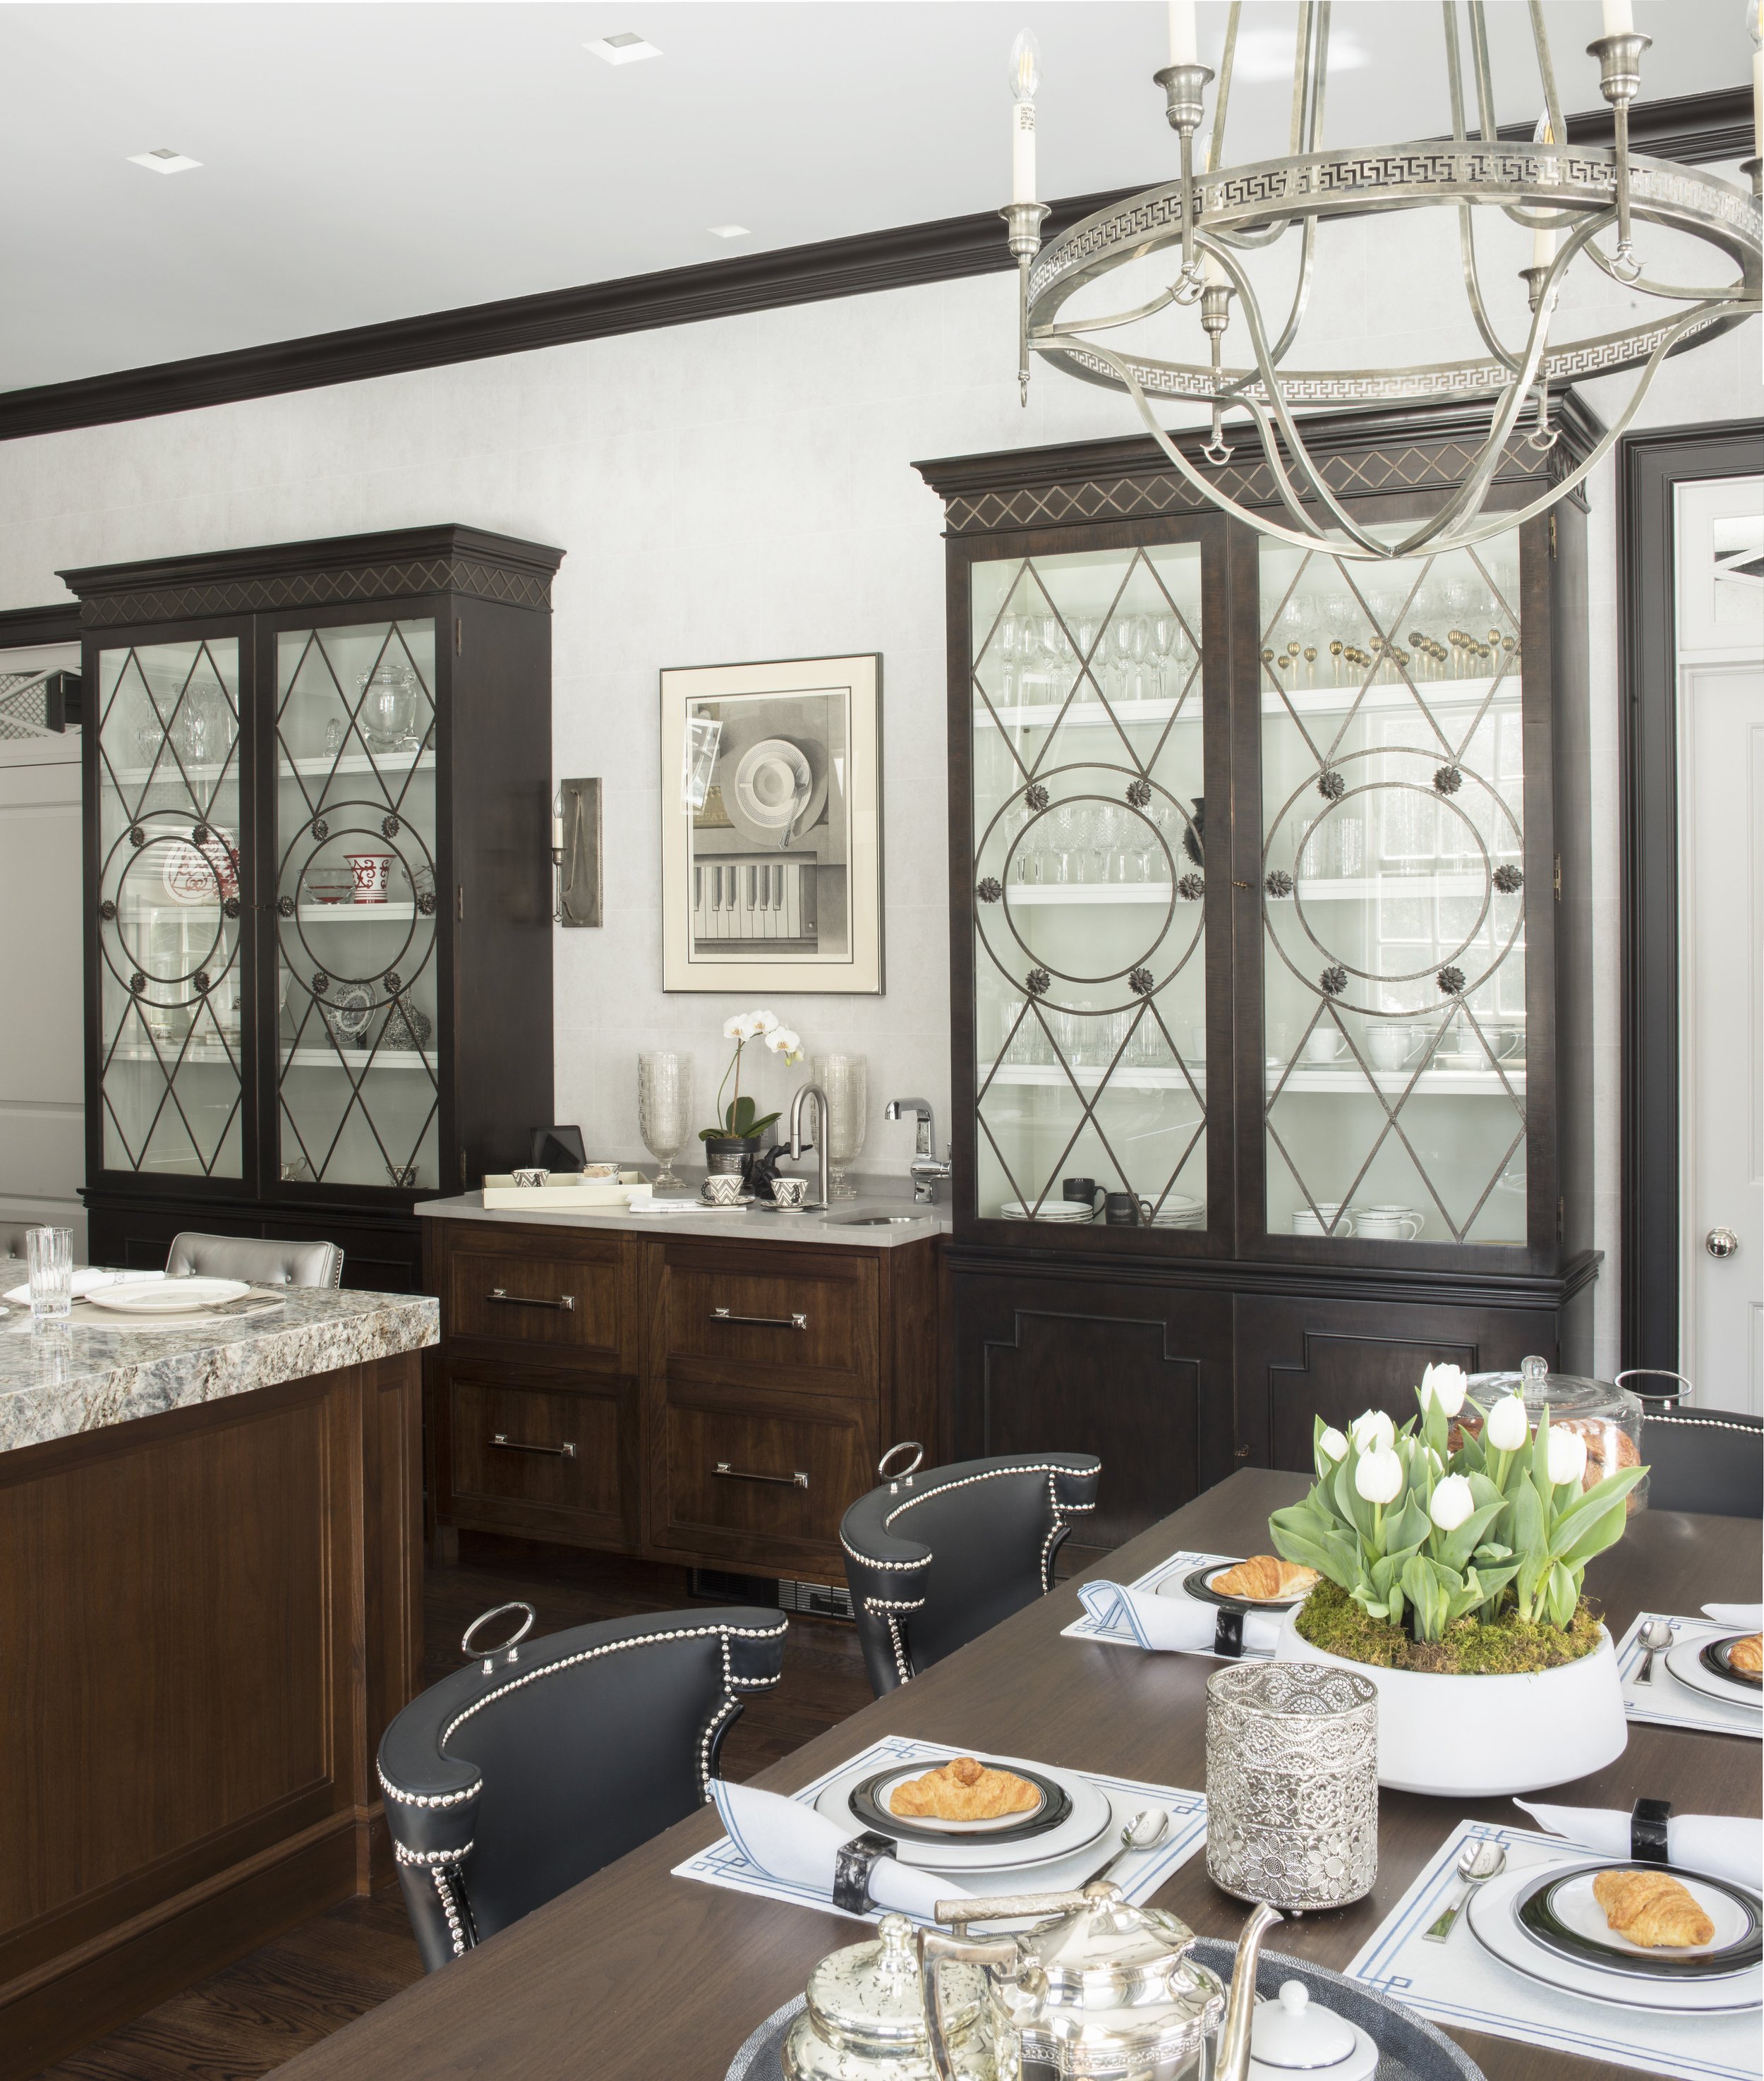 17-dining-area-cabinets-dark-wood-neoclassical-greenwich-connecticut.JPG